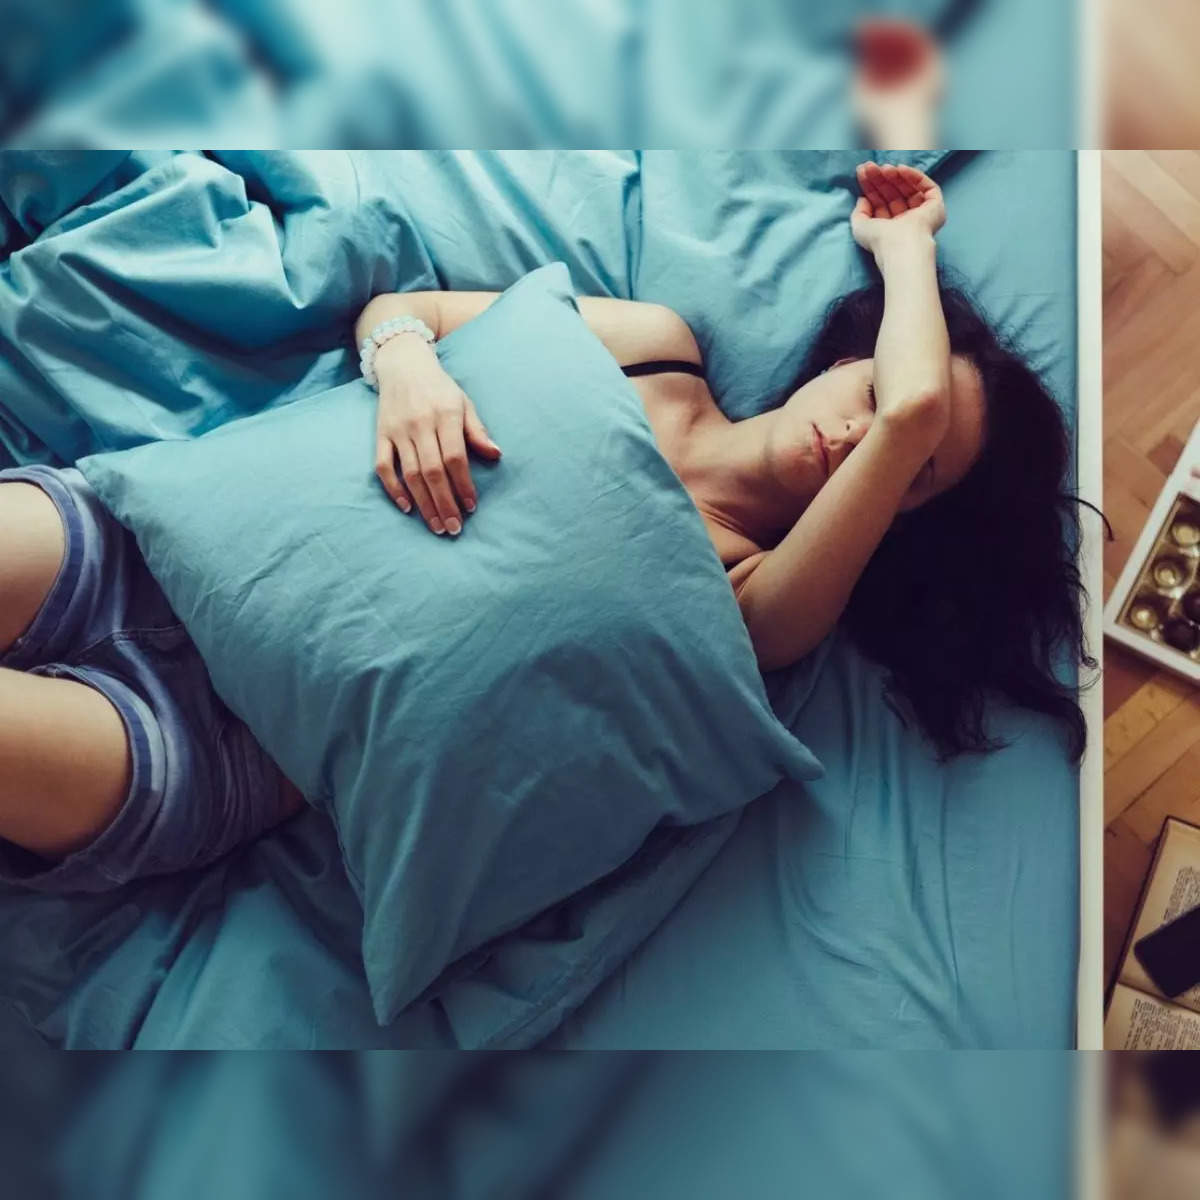 Woman with Underwear in Hands, Man Sleep in Bed. Stock Image